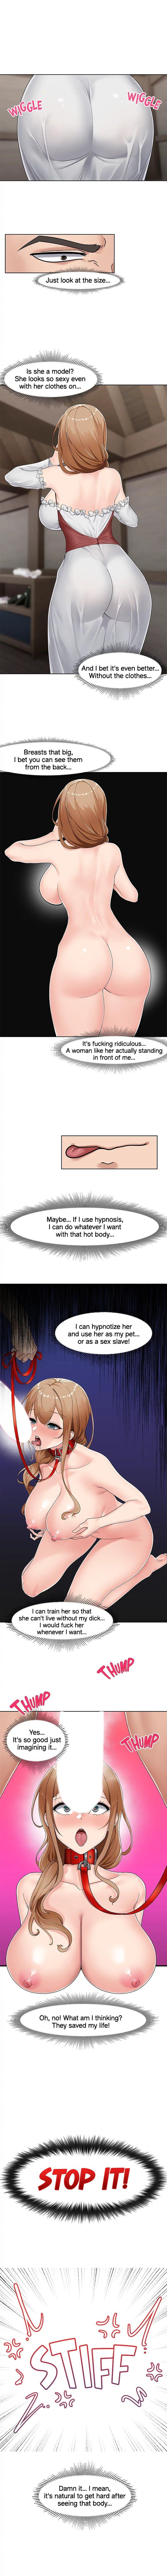 Absolute Hypnosis in Another World 15